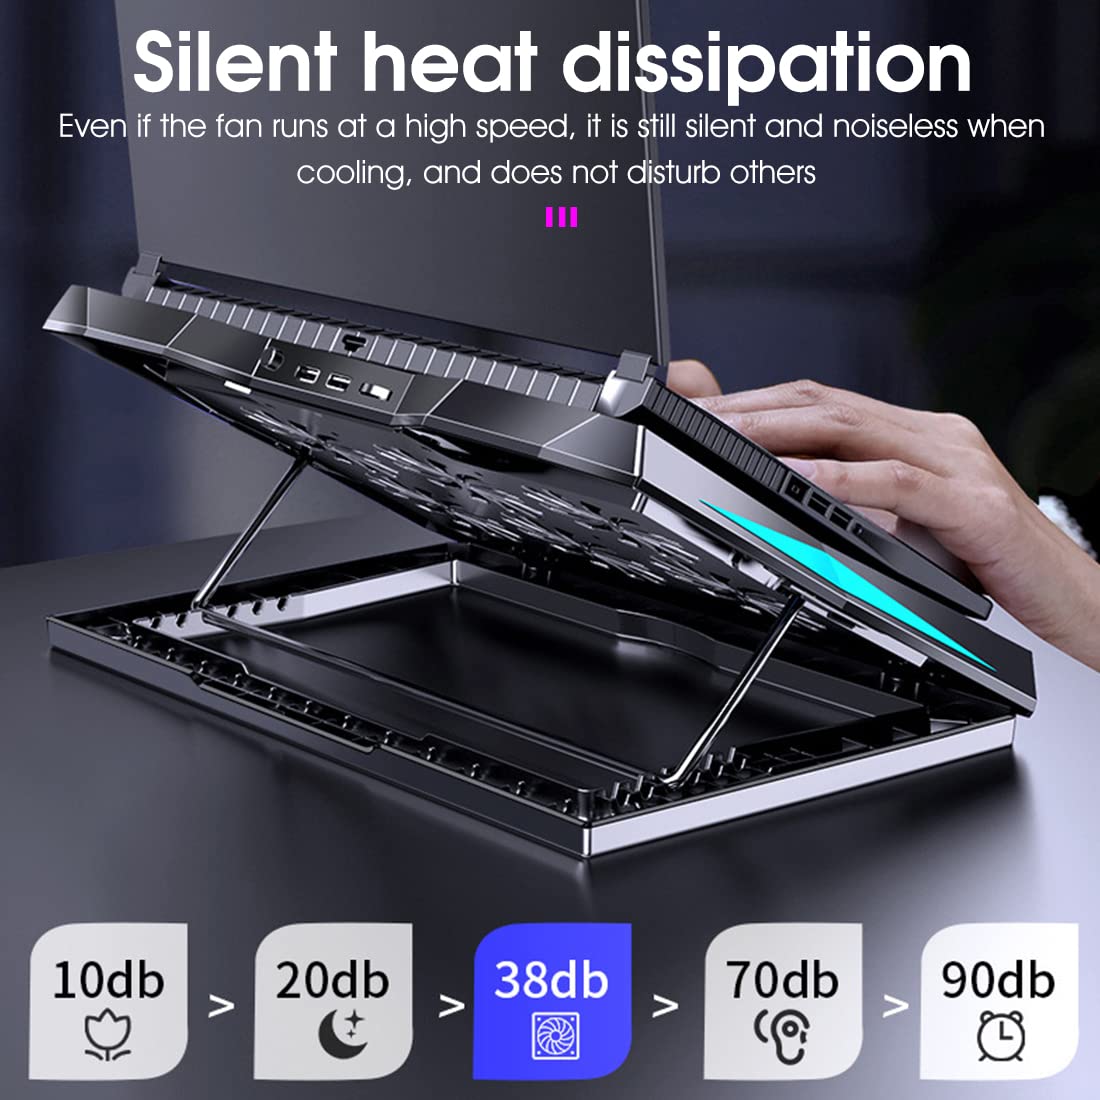 Laptop-Accessories-Laptop-Cooling-Pad-Gaming-Laptop-Stand-Cooler-Pad-with-6-Cooling-Fans-Notebook-Riser-with-6-Adjustable-Height-2-USB-Port-for-11-17-3-Inch-Laptop-10